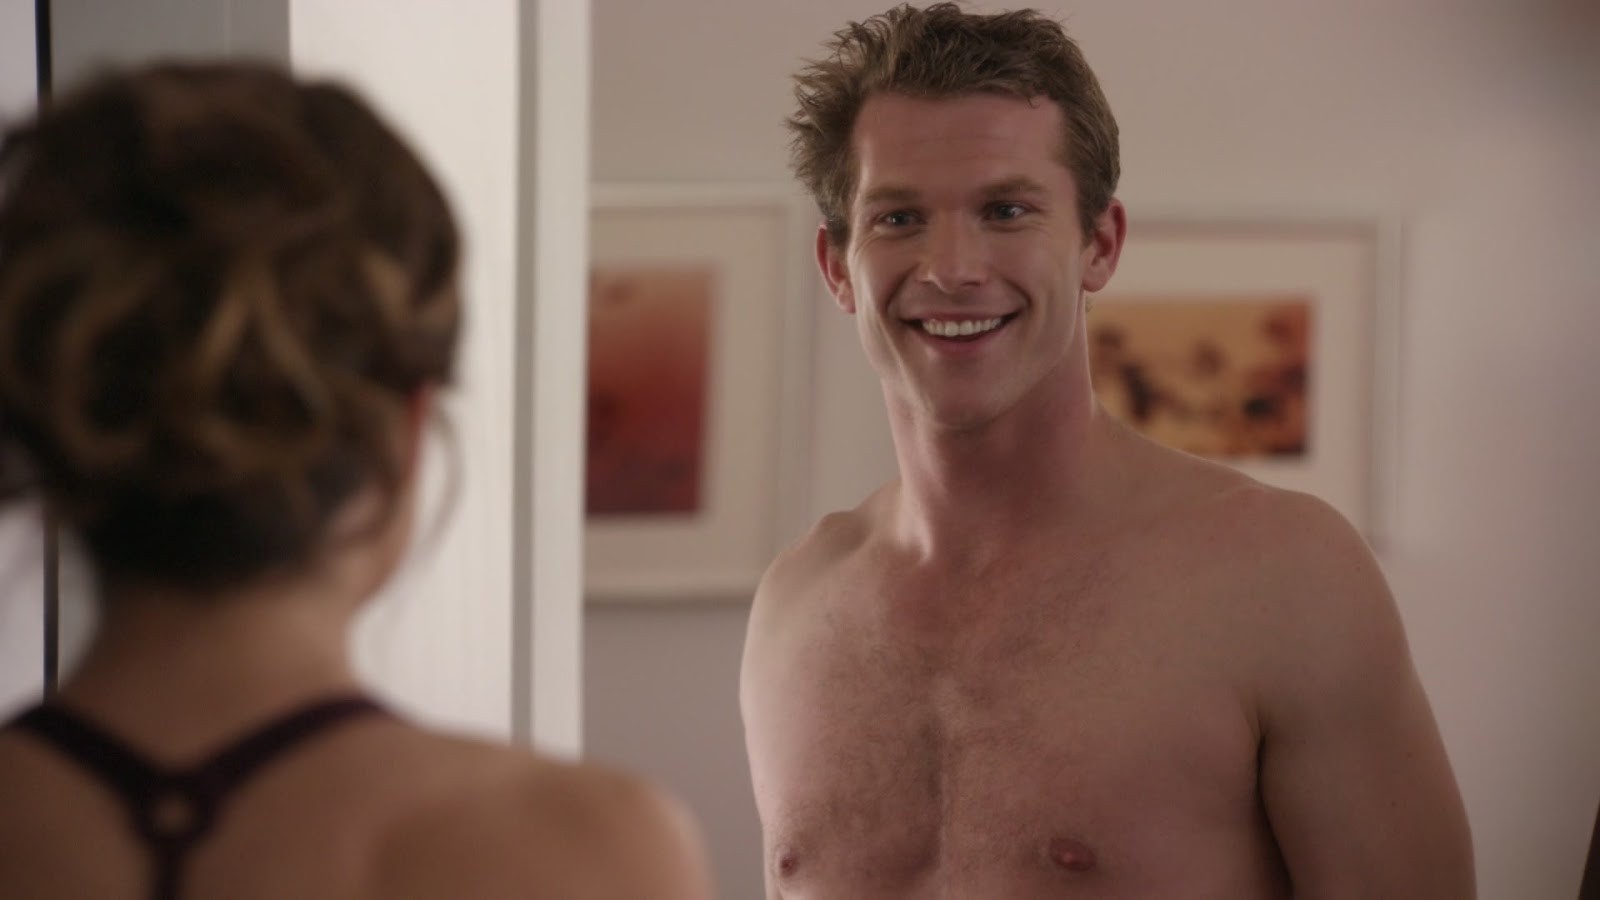 Chad Connell in "Being Erica" Ep. 